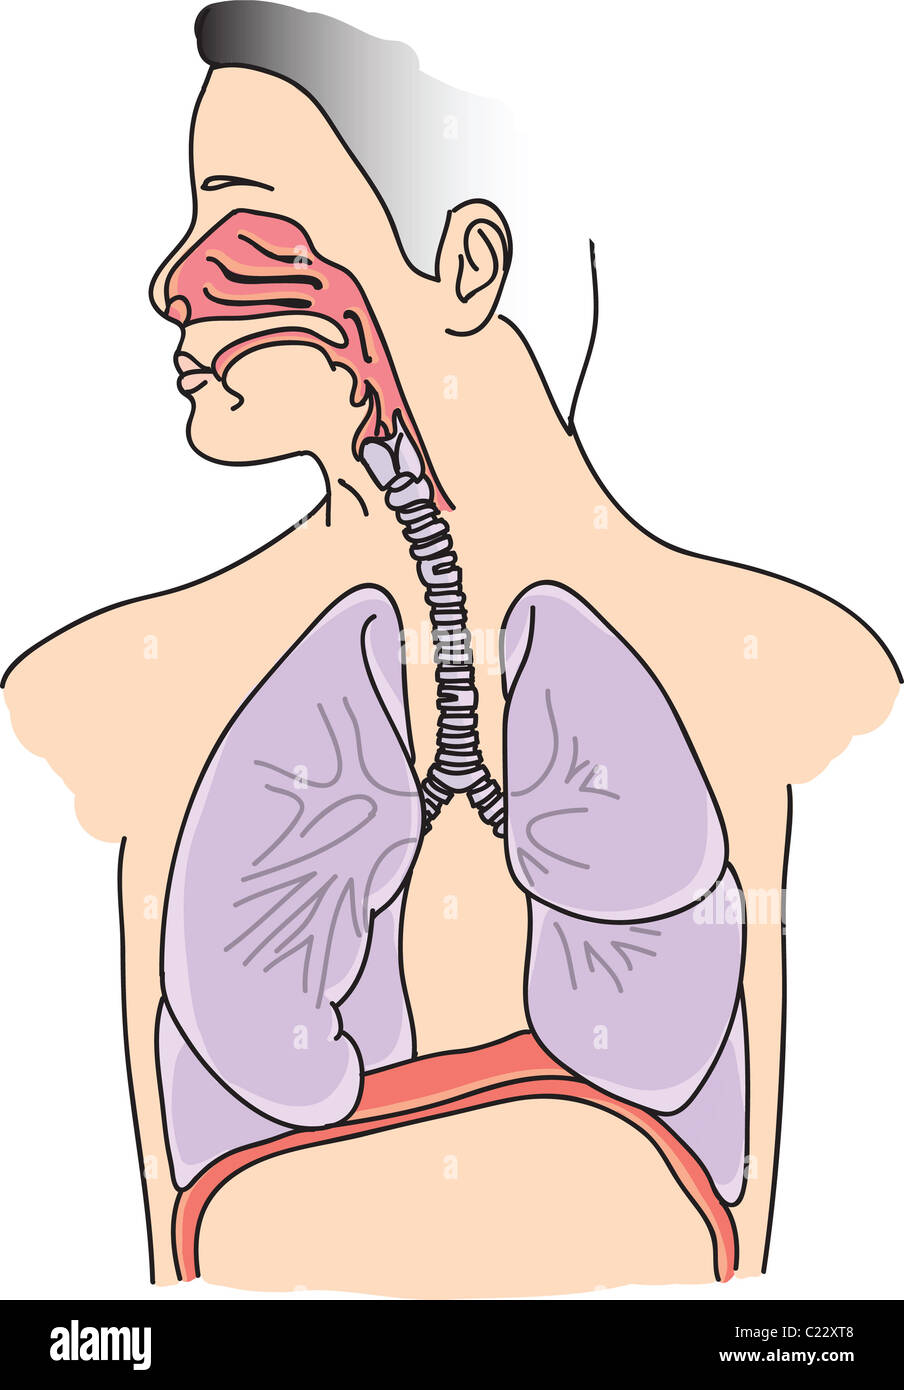 Structure of human lungs and respiratory system illustration Stock Photo